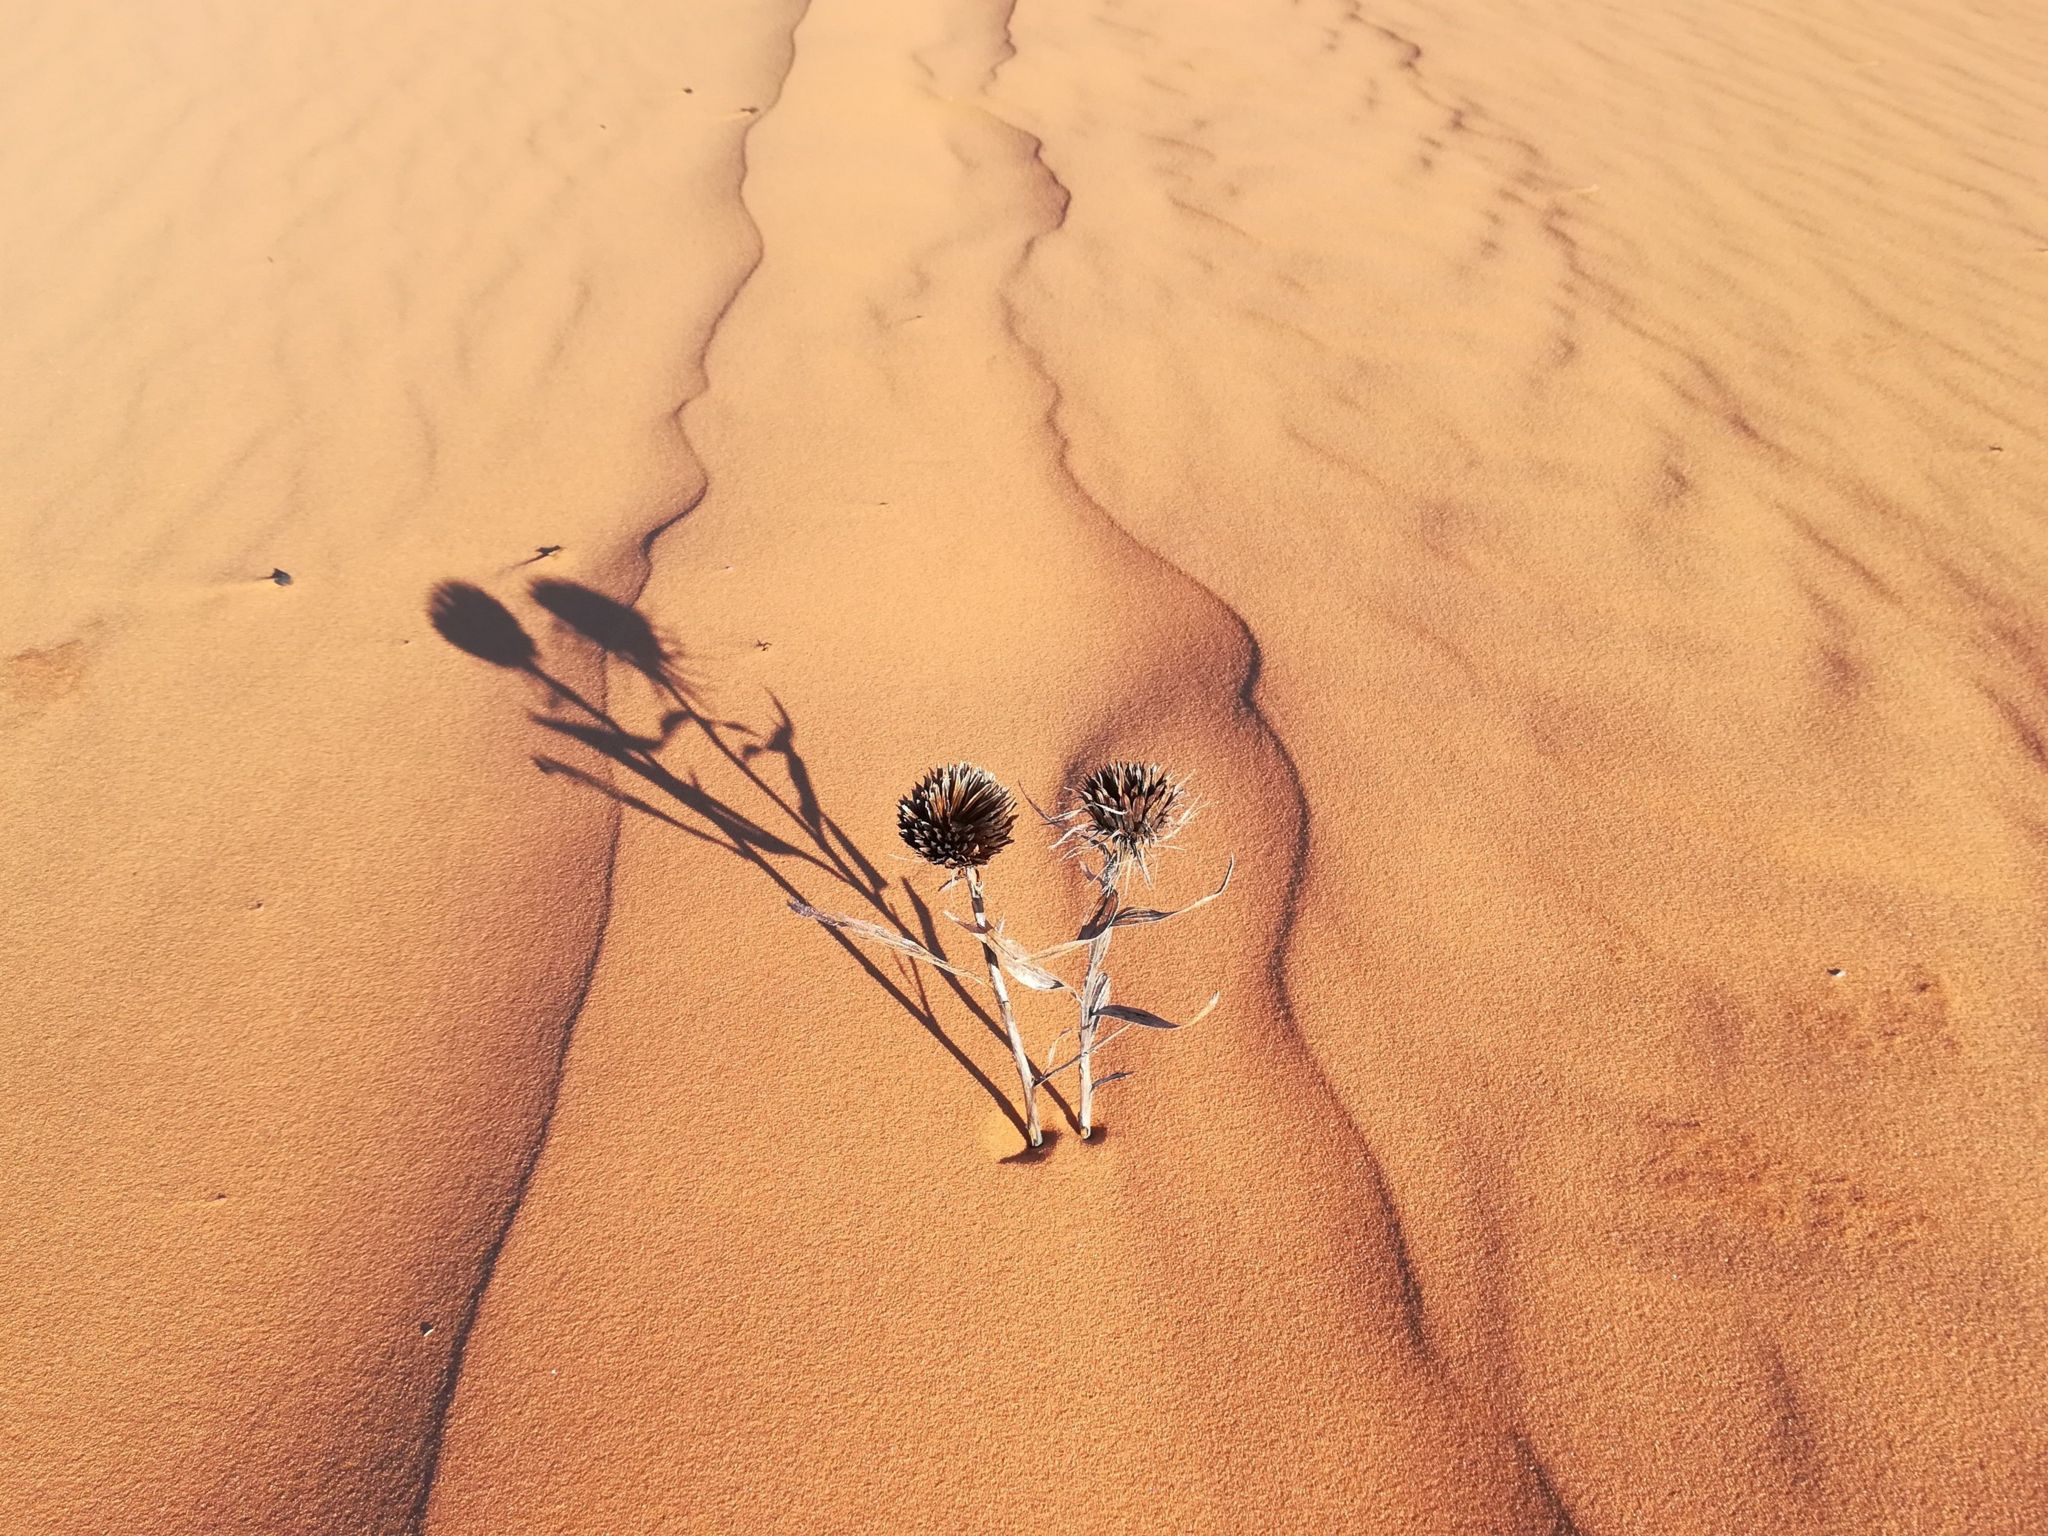 The shadow form two plants placed in the desert sand